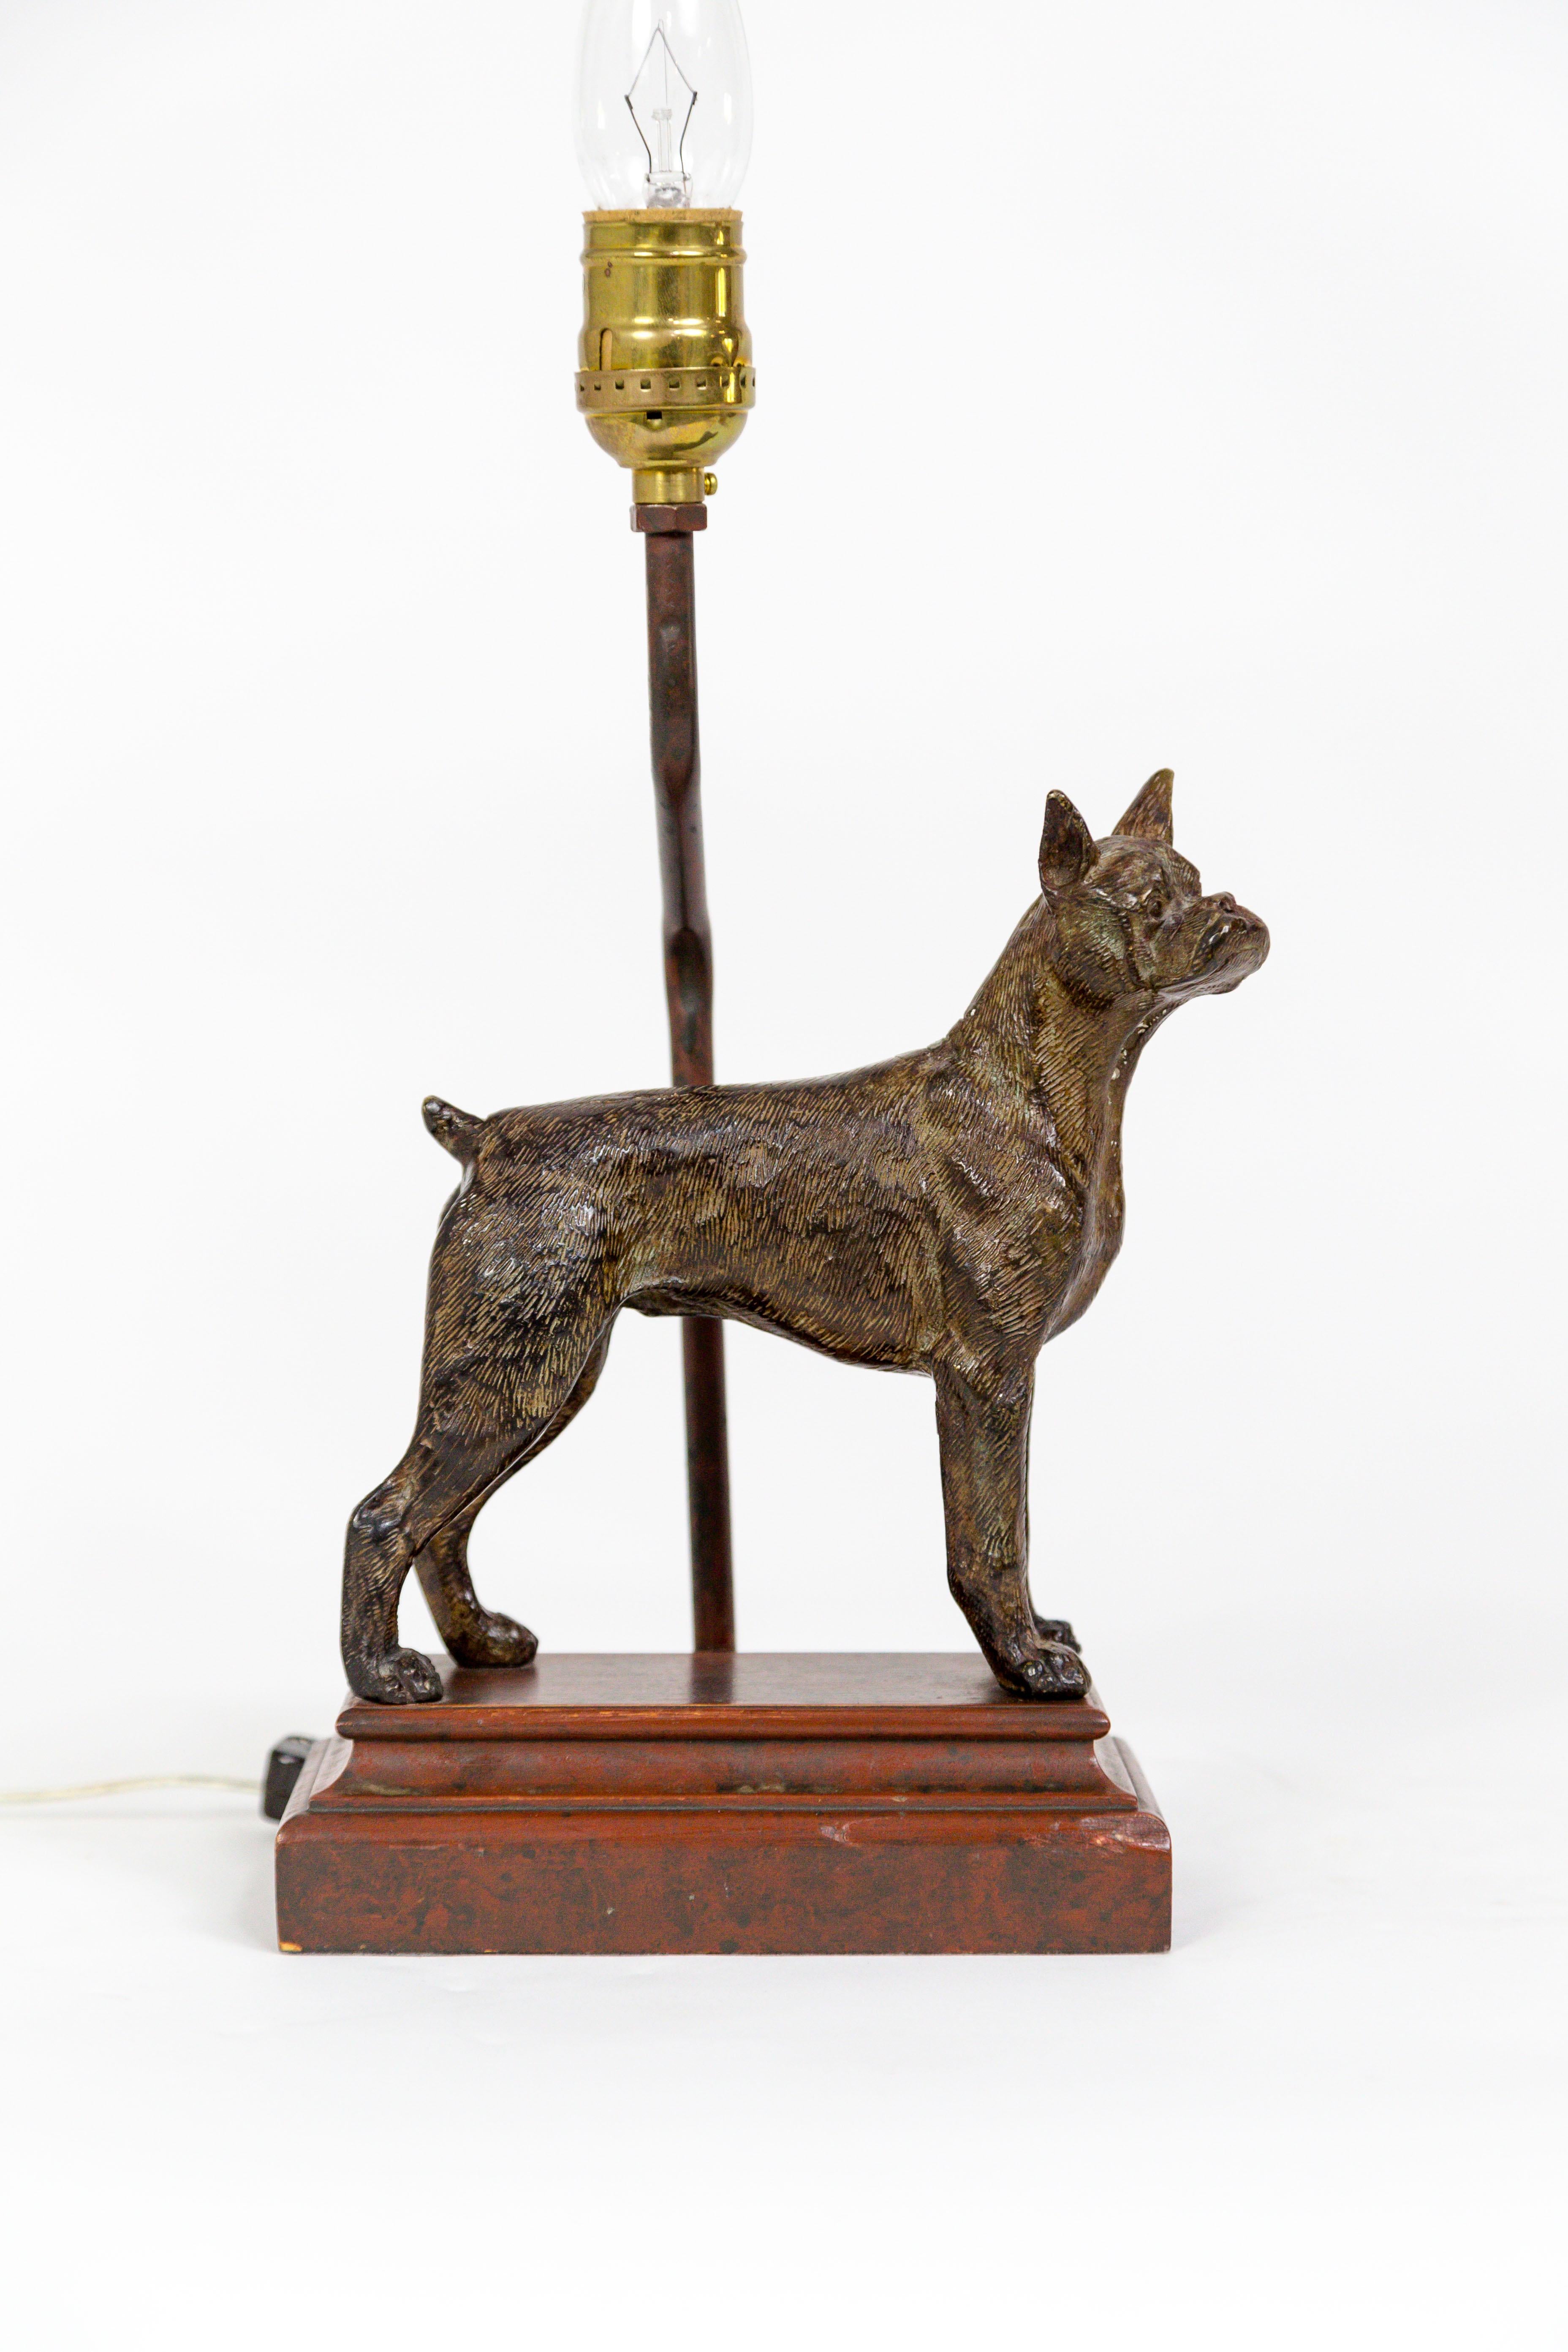 A charming, cast bronze Boxer dog created at the turn of the 20th century, standing on an aged, wooden pedestal; wired as a lamp with a slender, tinted brass stem. Newly rewired with a 3-way switch. American, circa 1900. 6.75